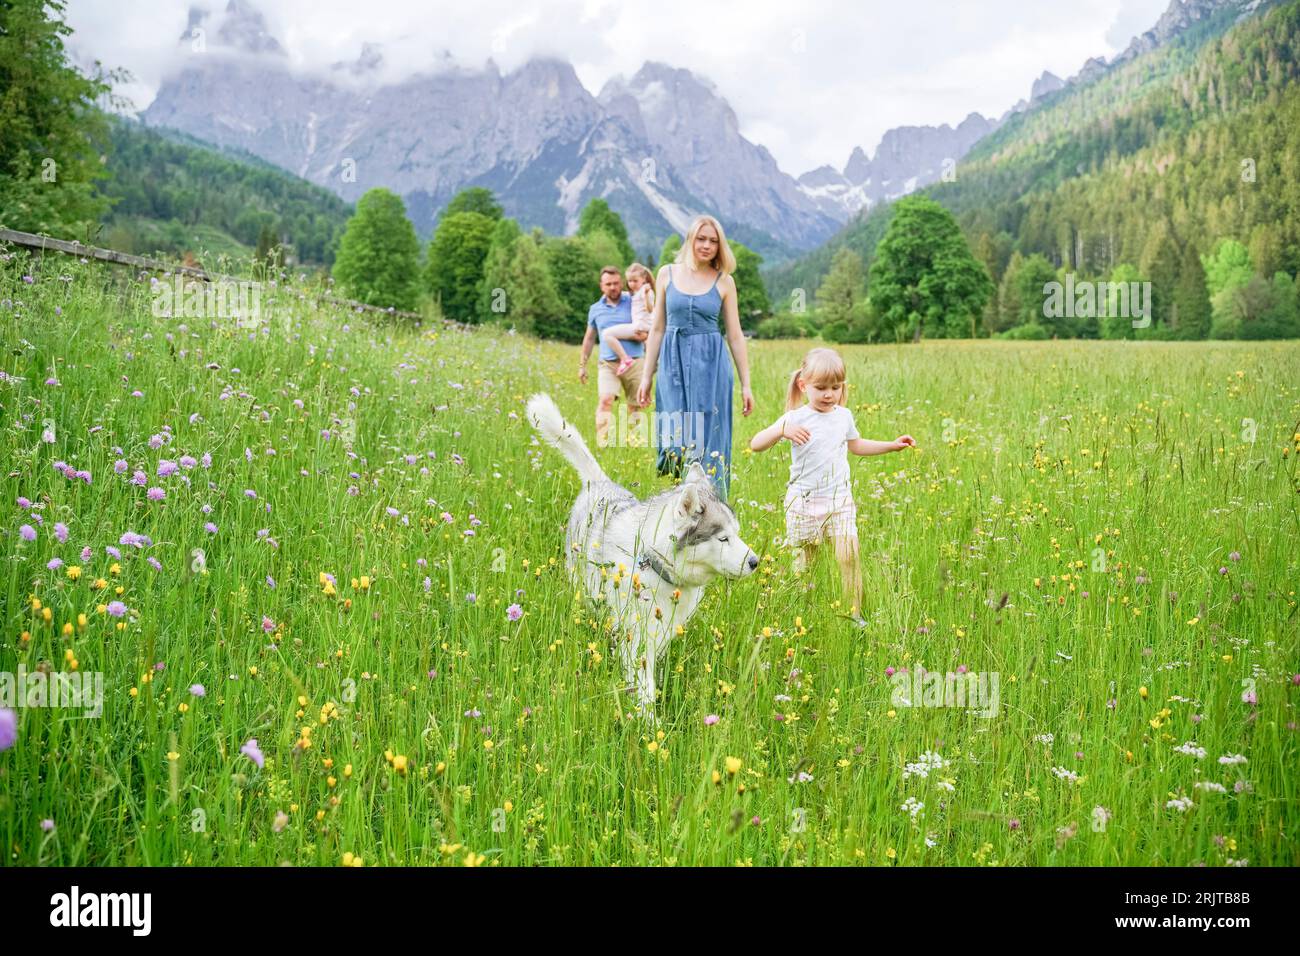 Family walking with dog amidst flowers in front of mountains Stock Photo